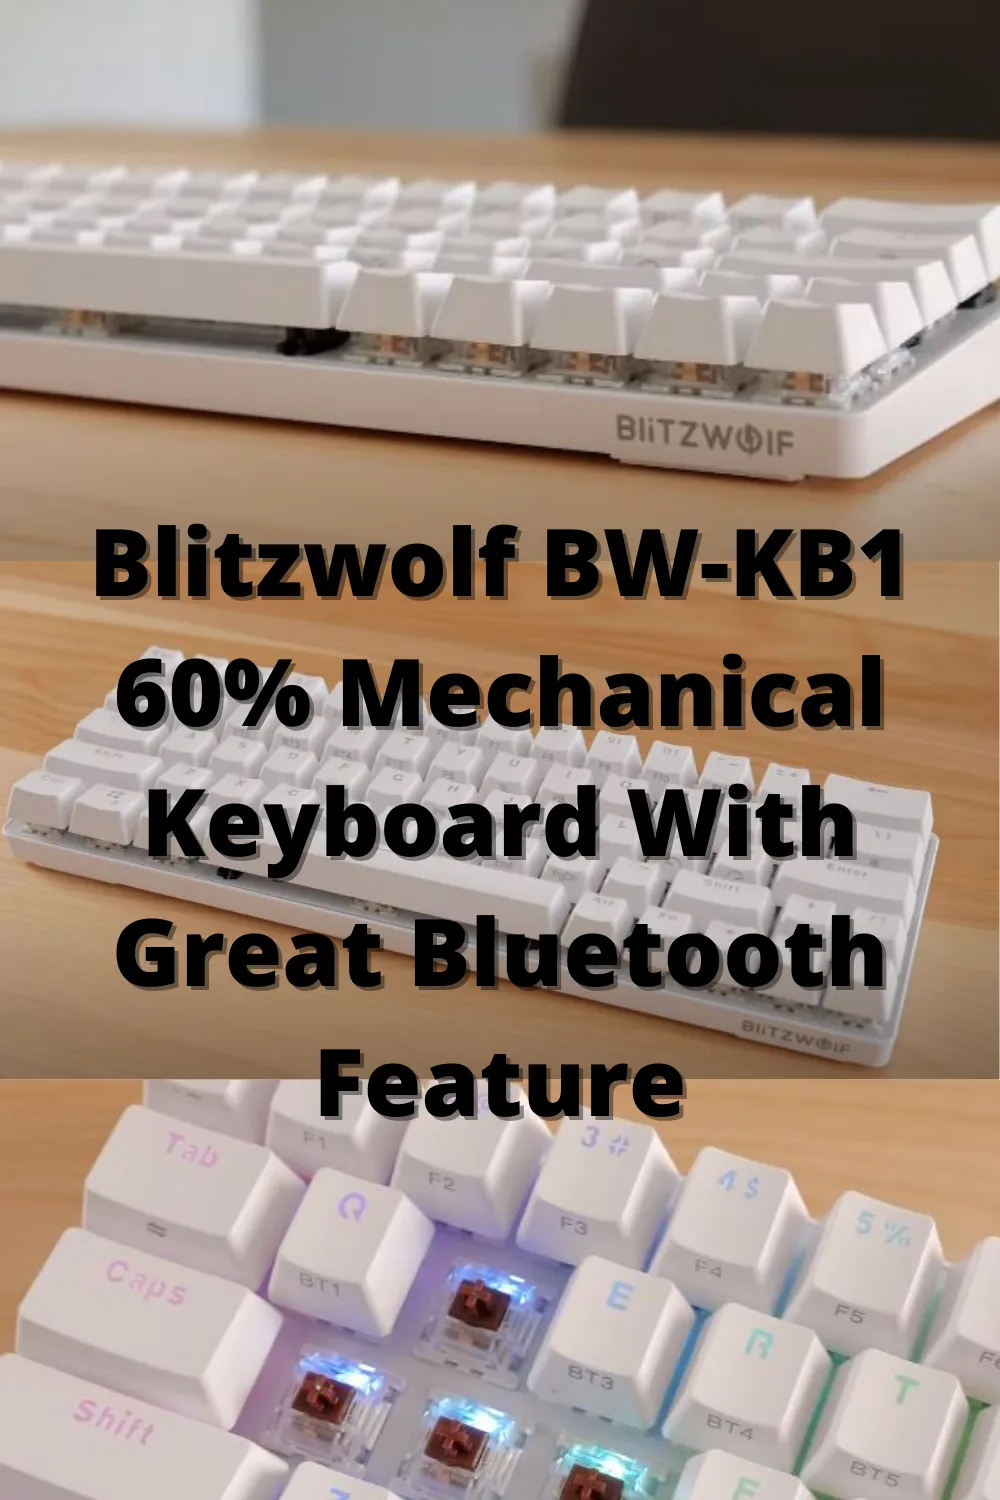 Blitzwolf BW-KB1 60% Mechanical Keyboard With Great Bluetooth Feature